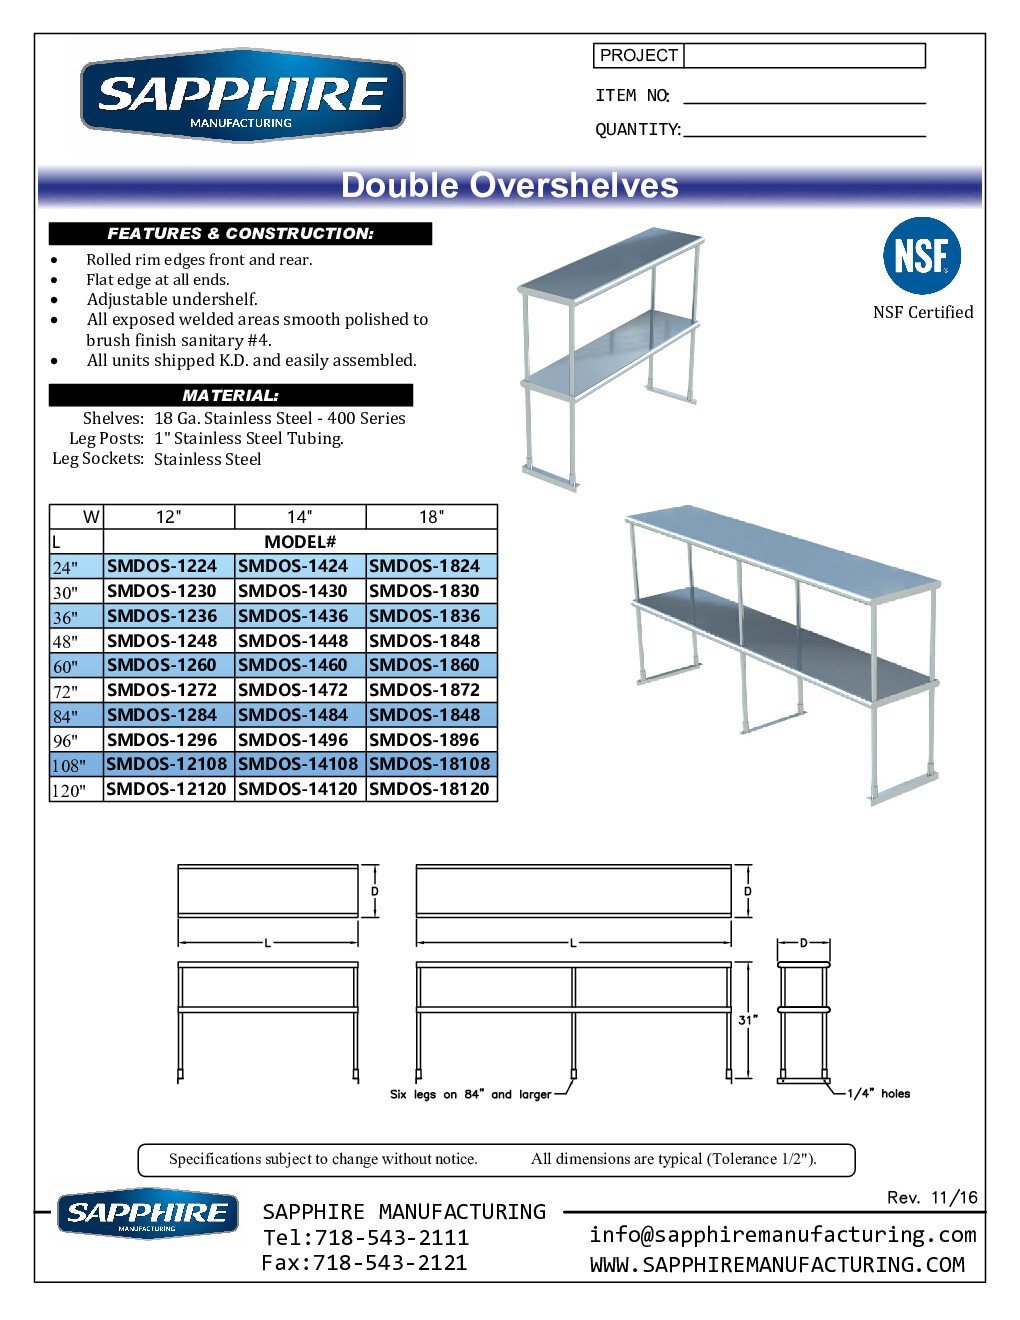 Sapphire Manufacturing SMDOS-12120 Table-Mounted Overshelf